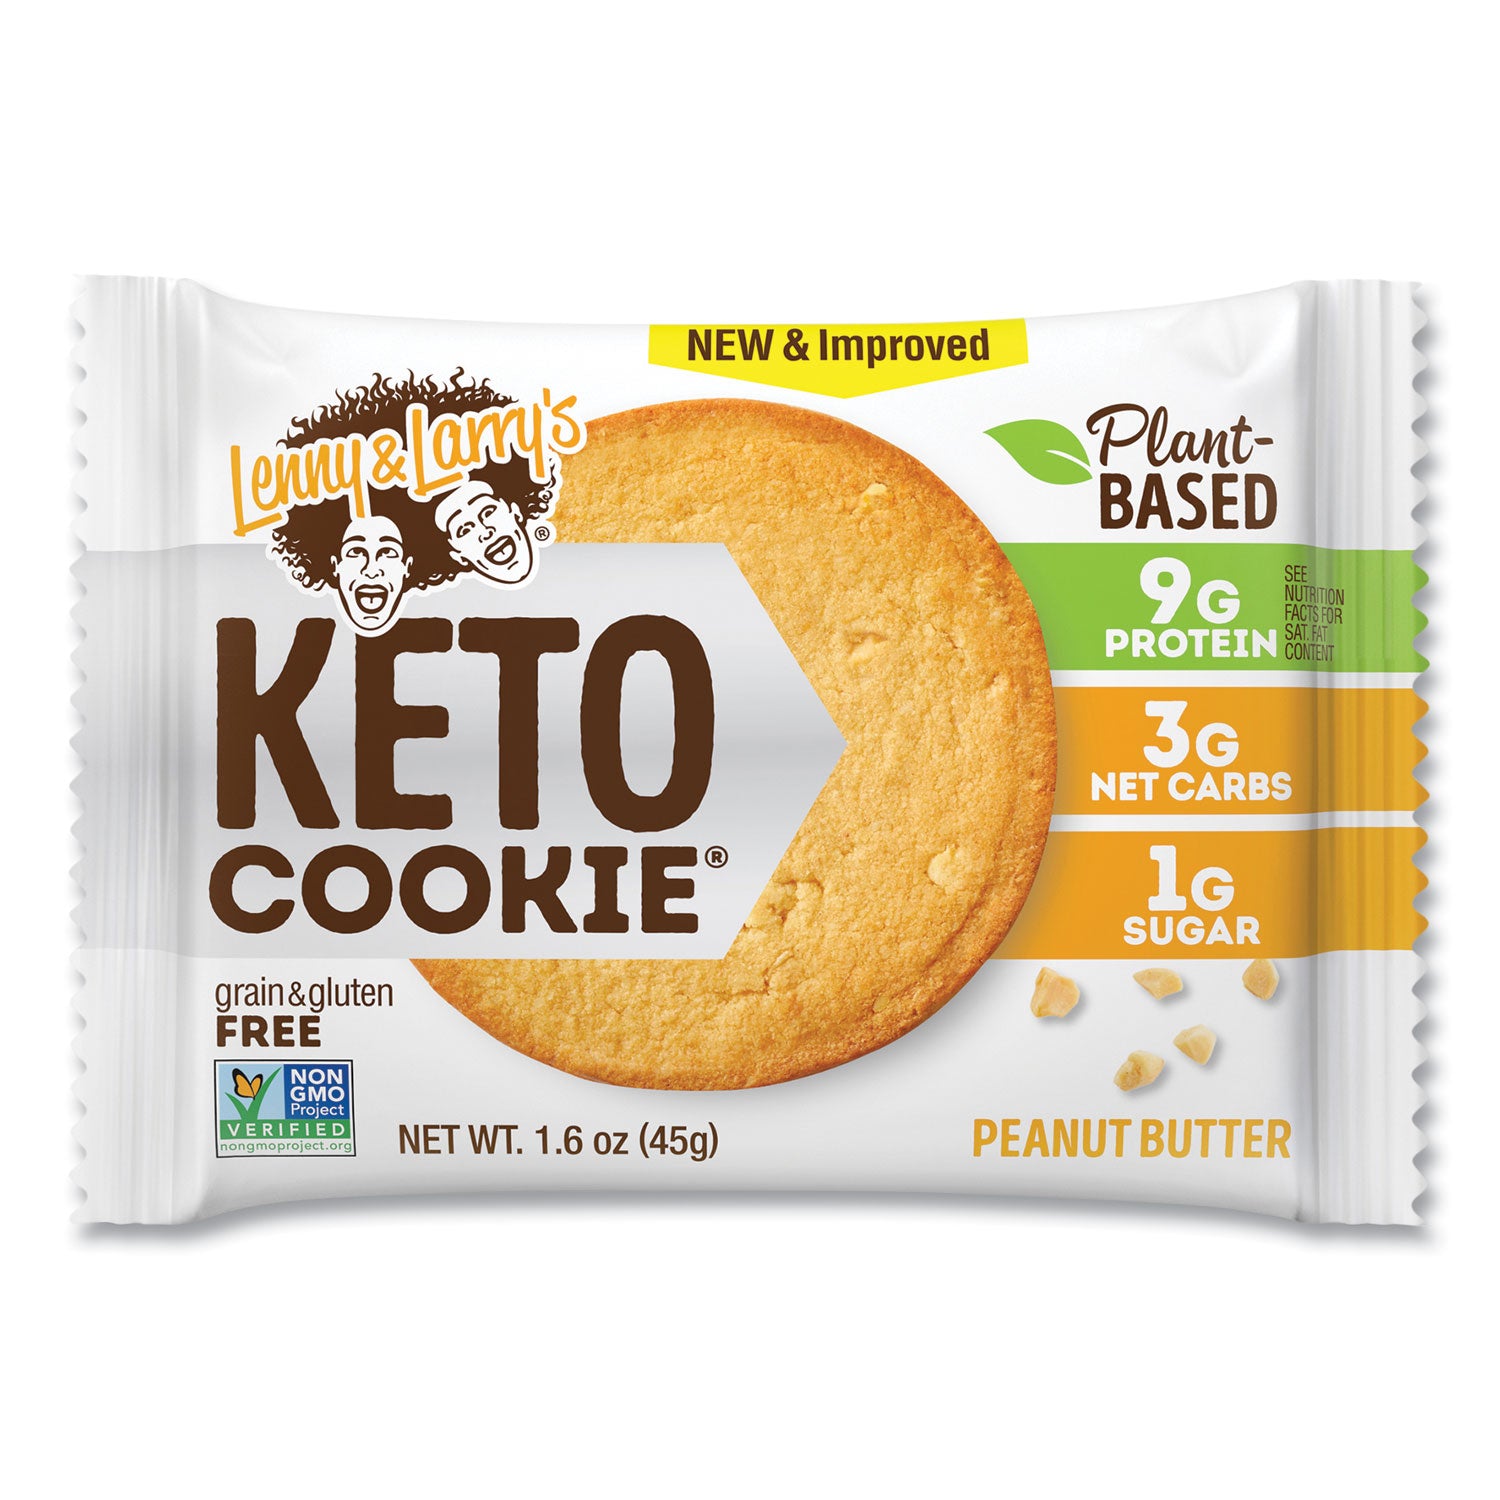 keto-peanut-butter-cookie-16-oz-packet-12-pack-ships-in-1-3-business-days_grr22002084 - 1